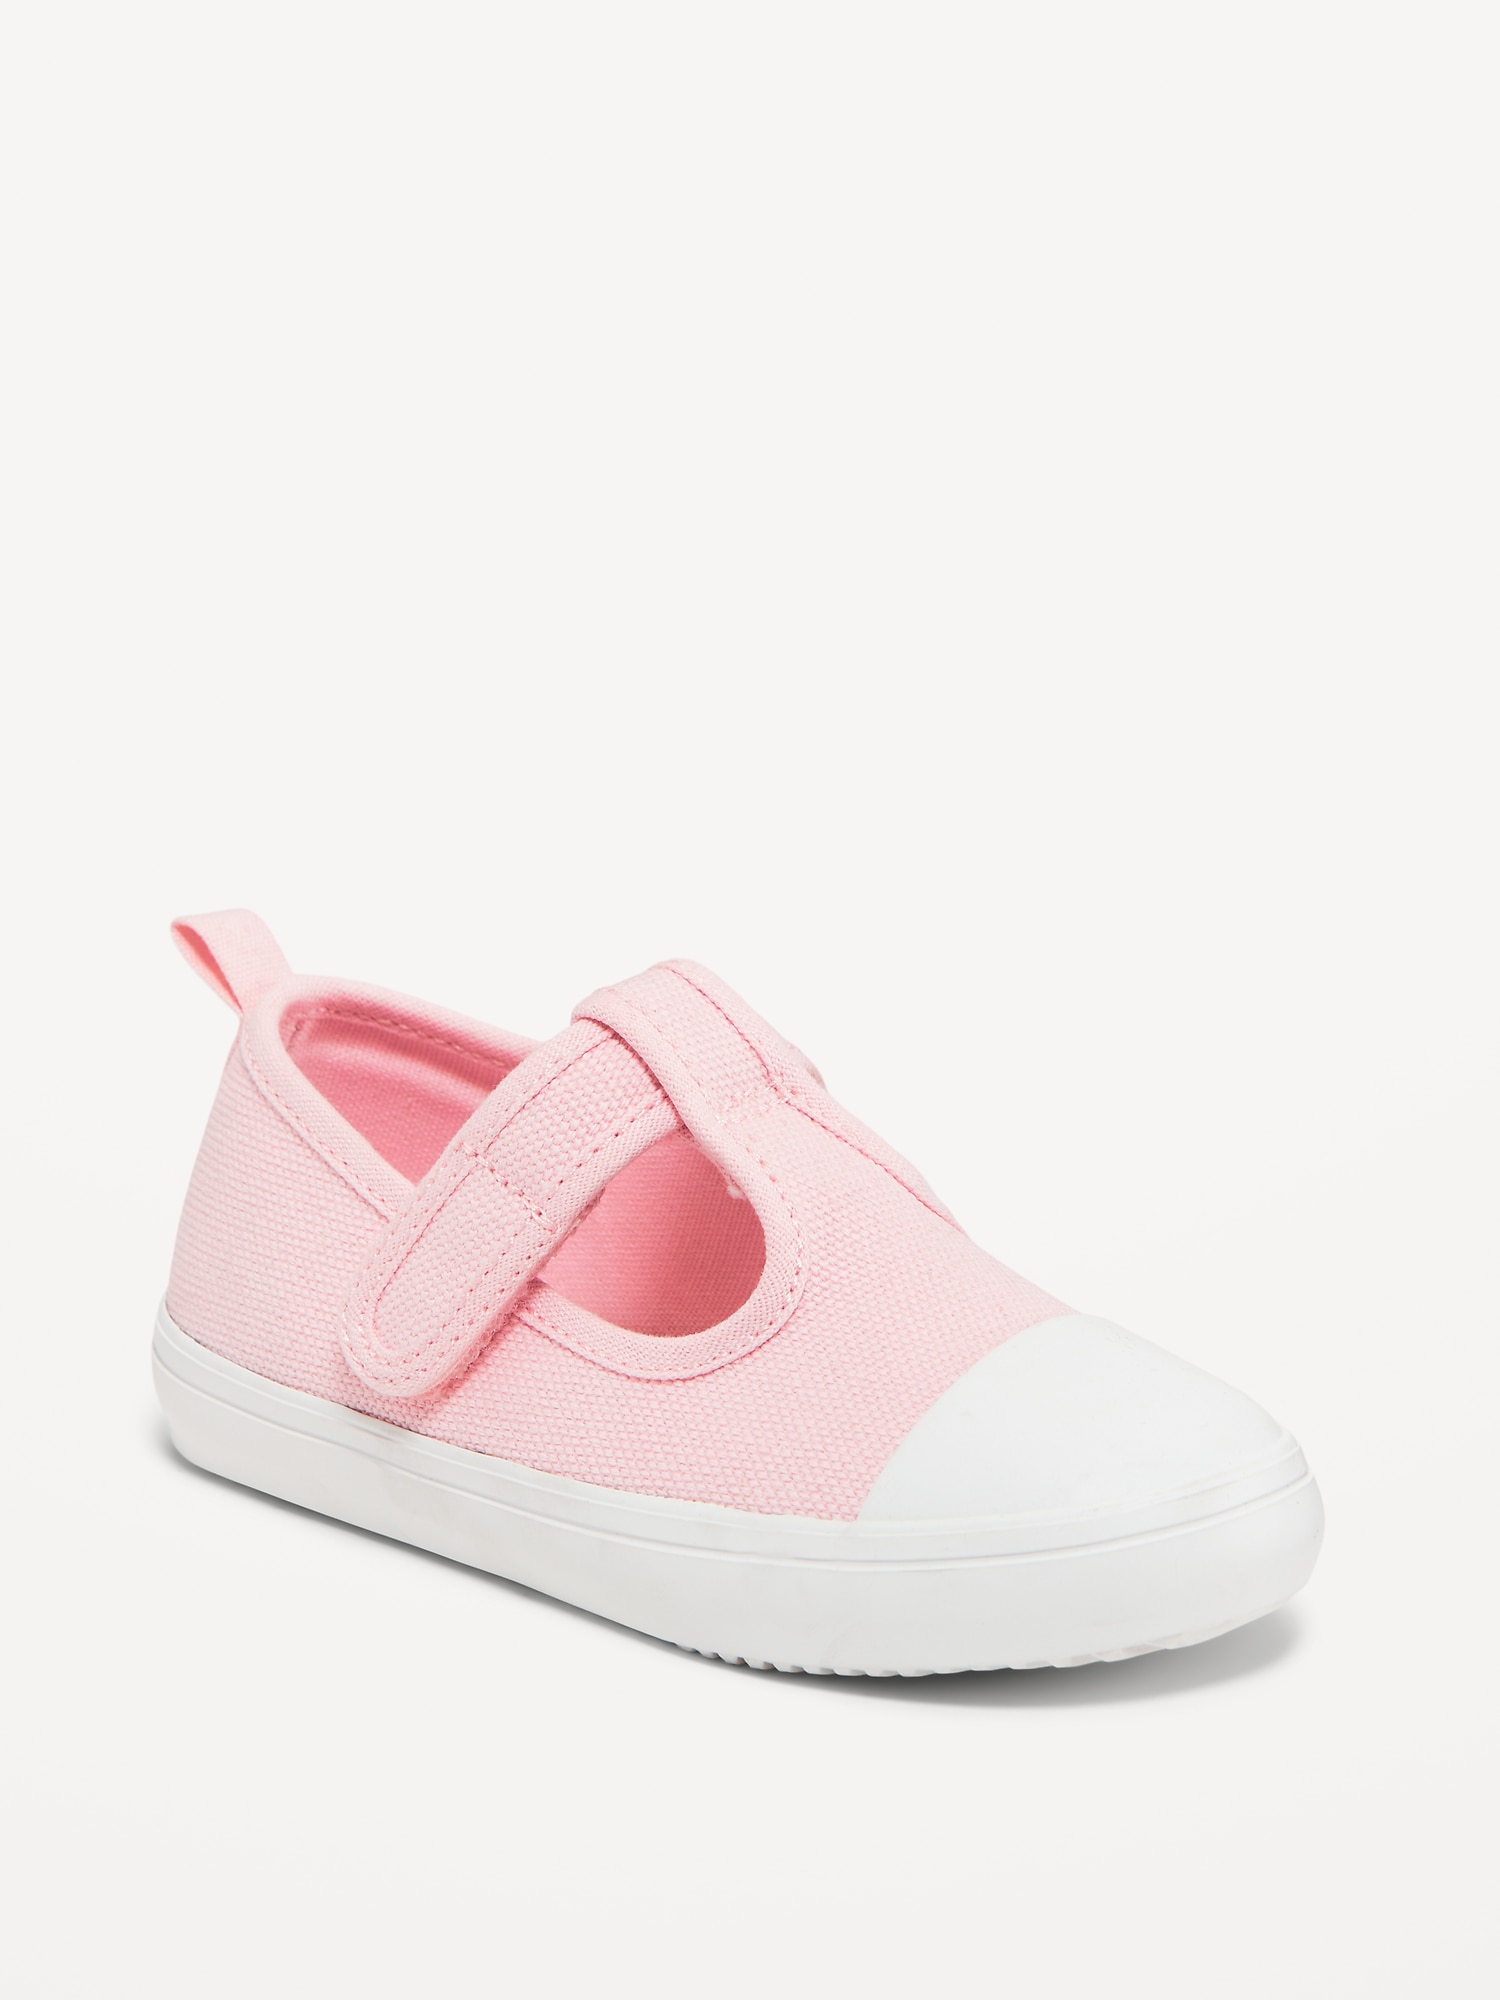 Mary-Jane Canvas Sneakers for Toddler Girls